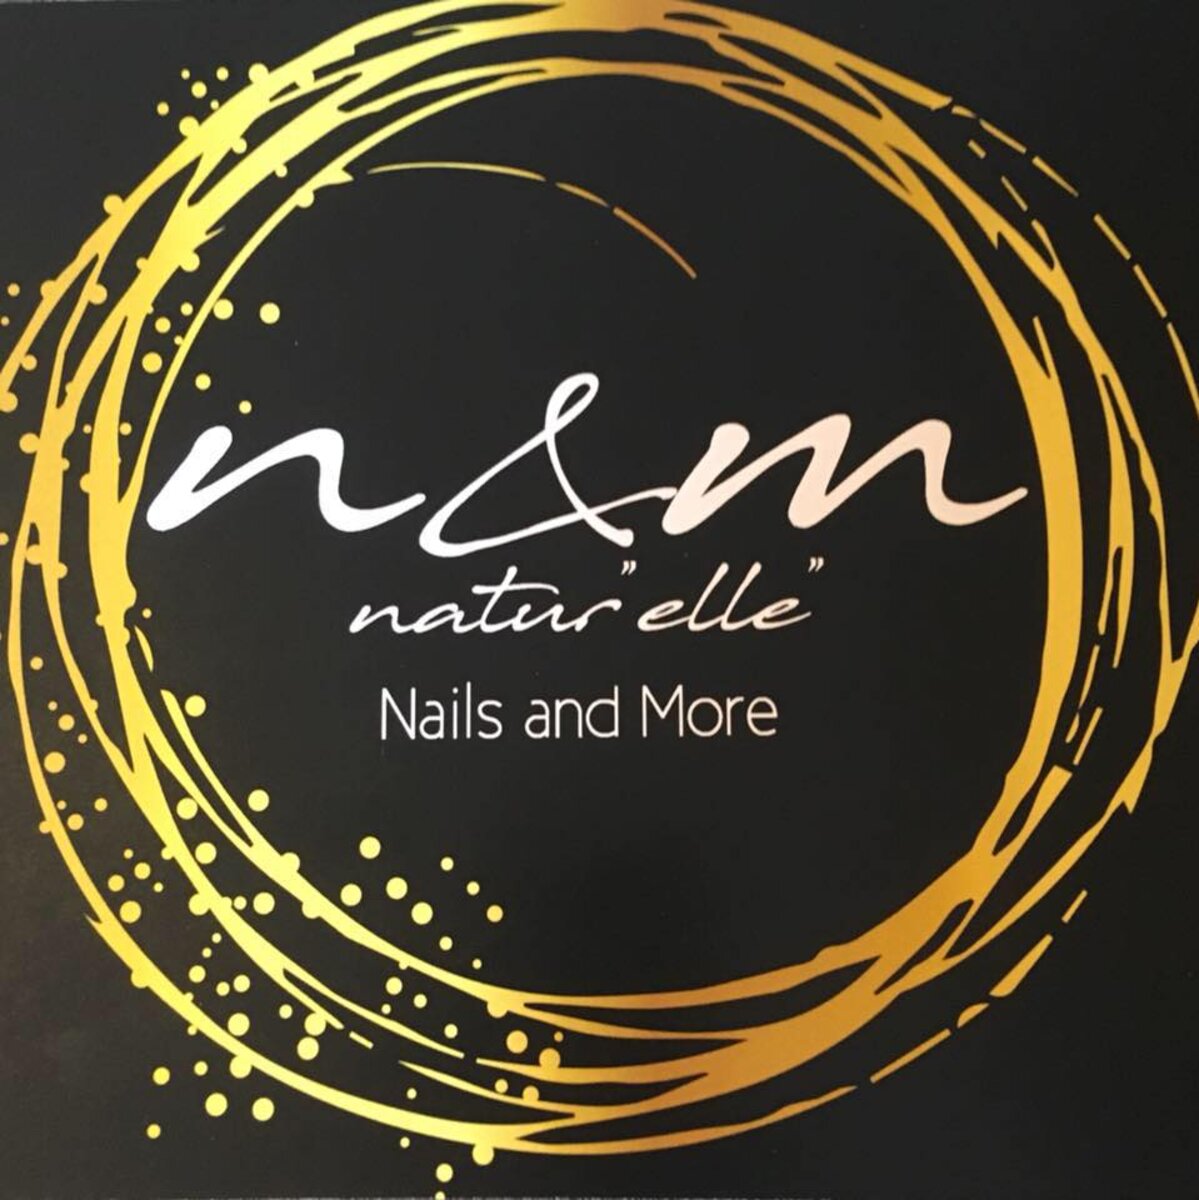 Naturelle Nails and More